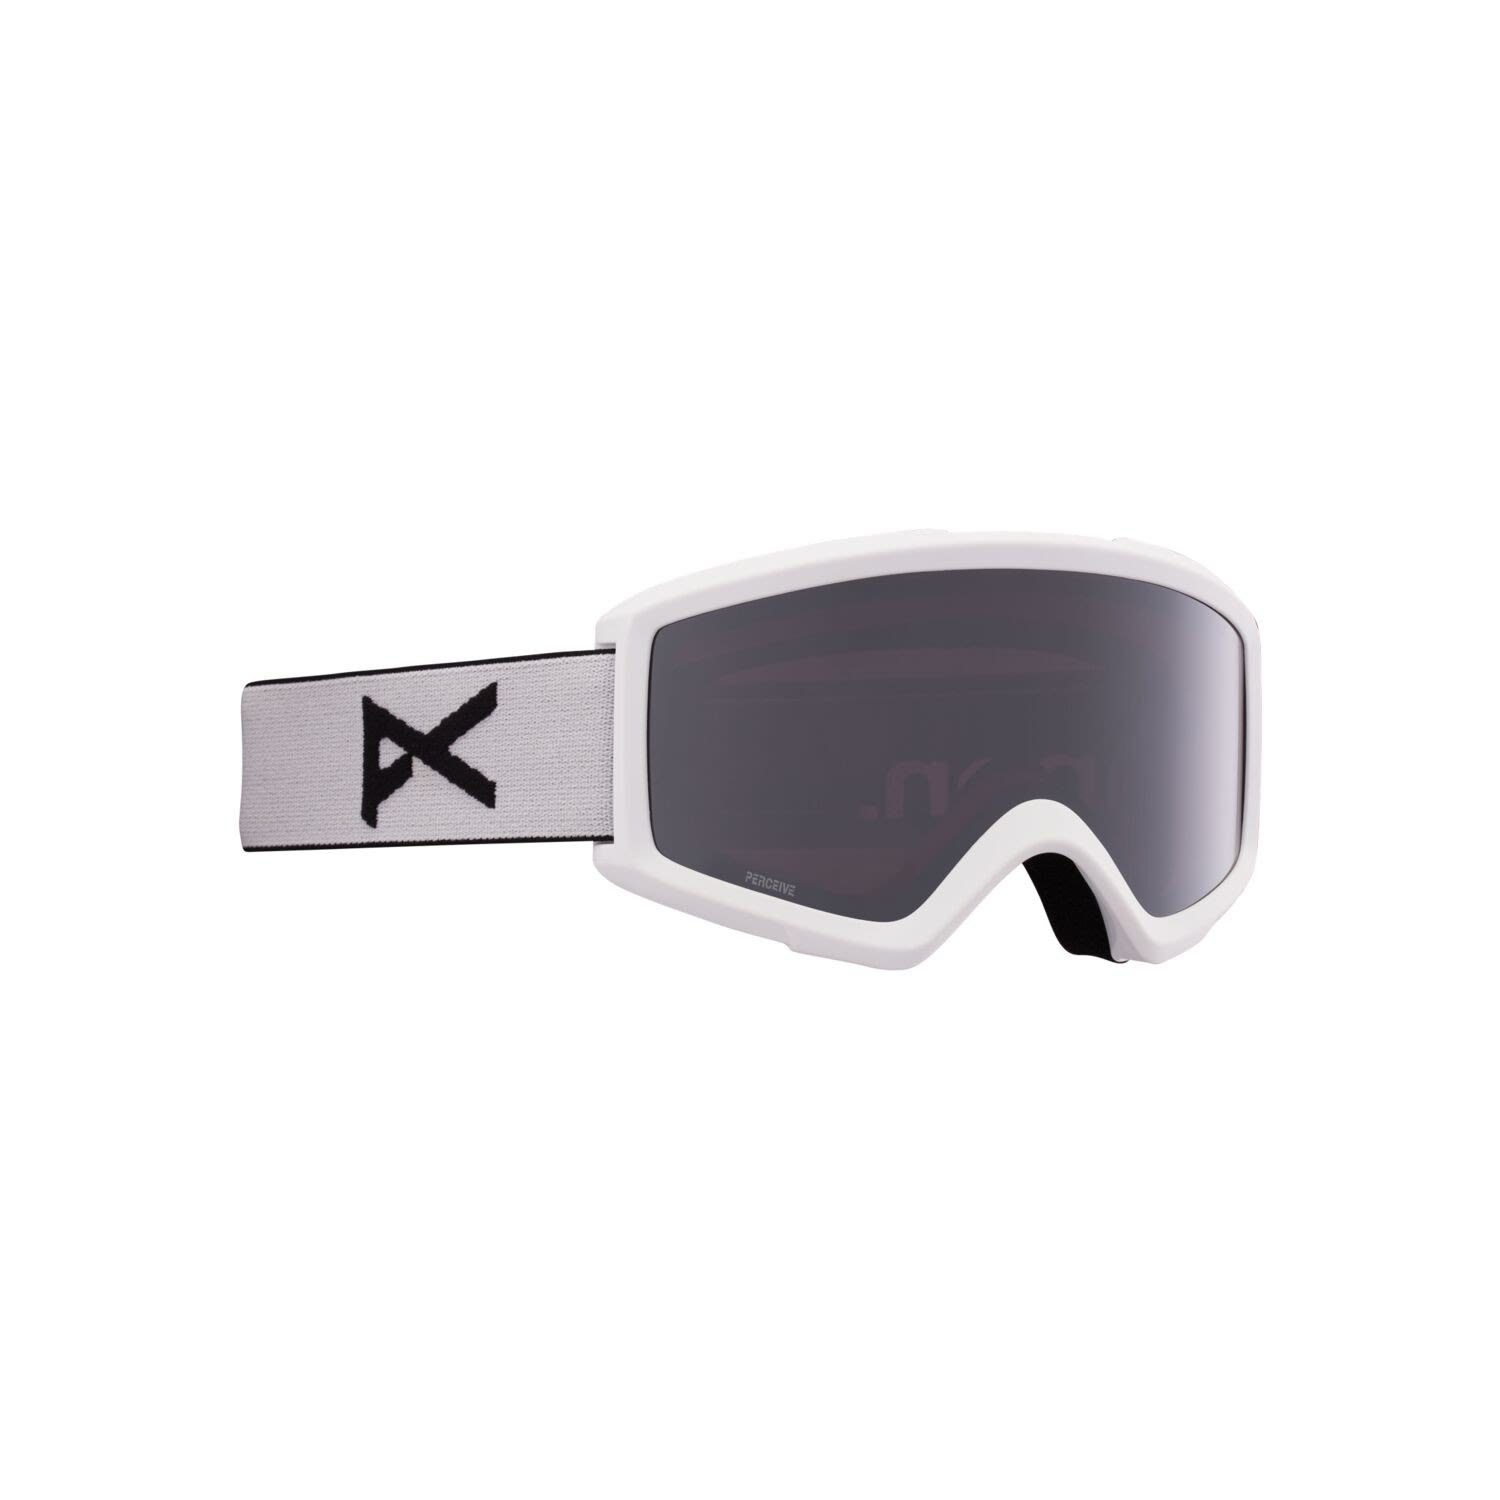 Anon Skibrille Spare With Amber Sunny - Onyx 2.0 White Perceive Helix - Perceive Anon Lens